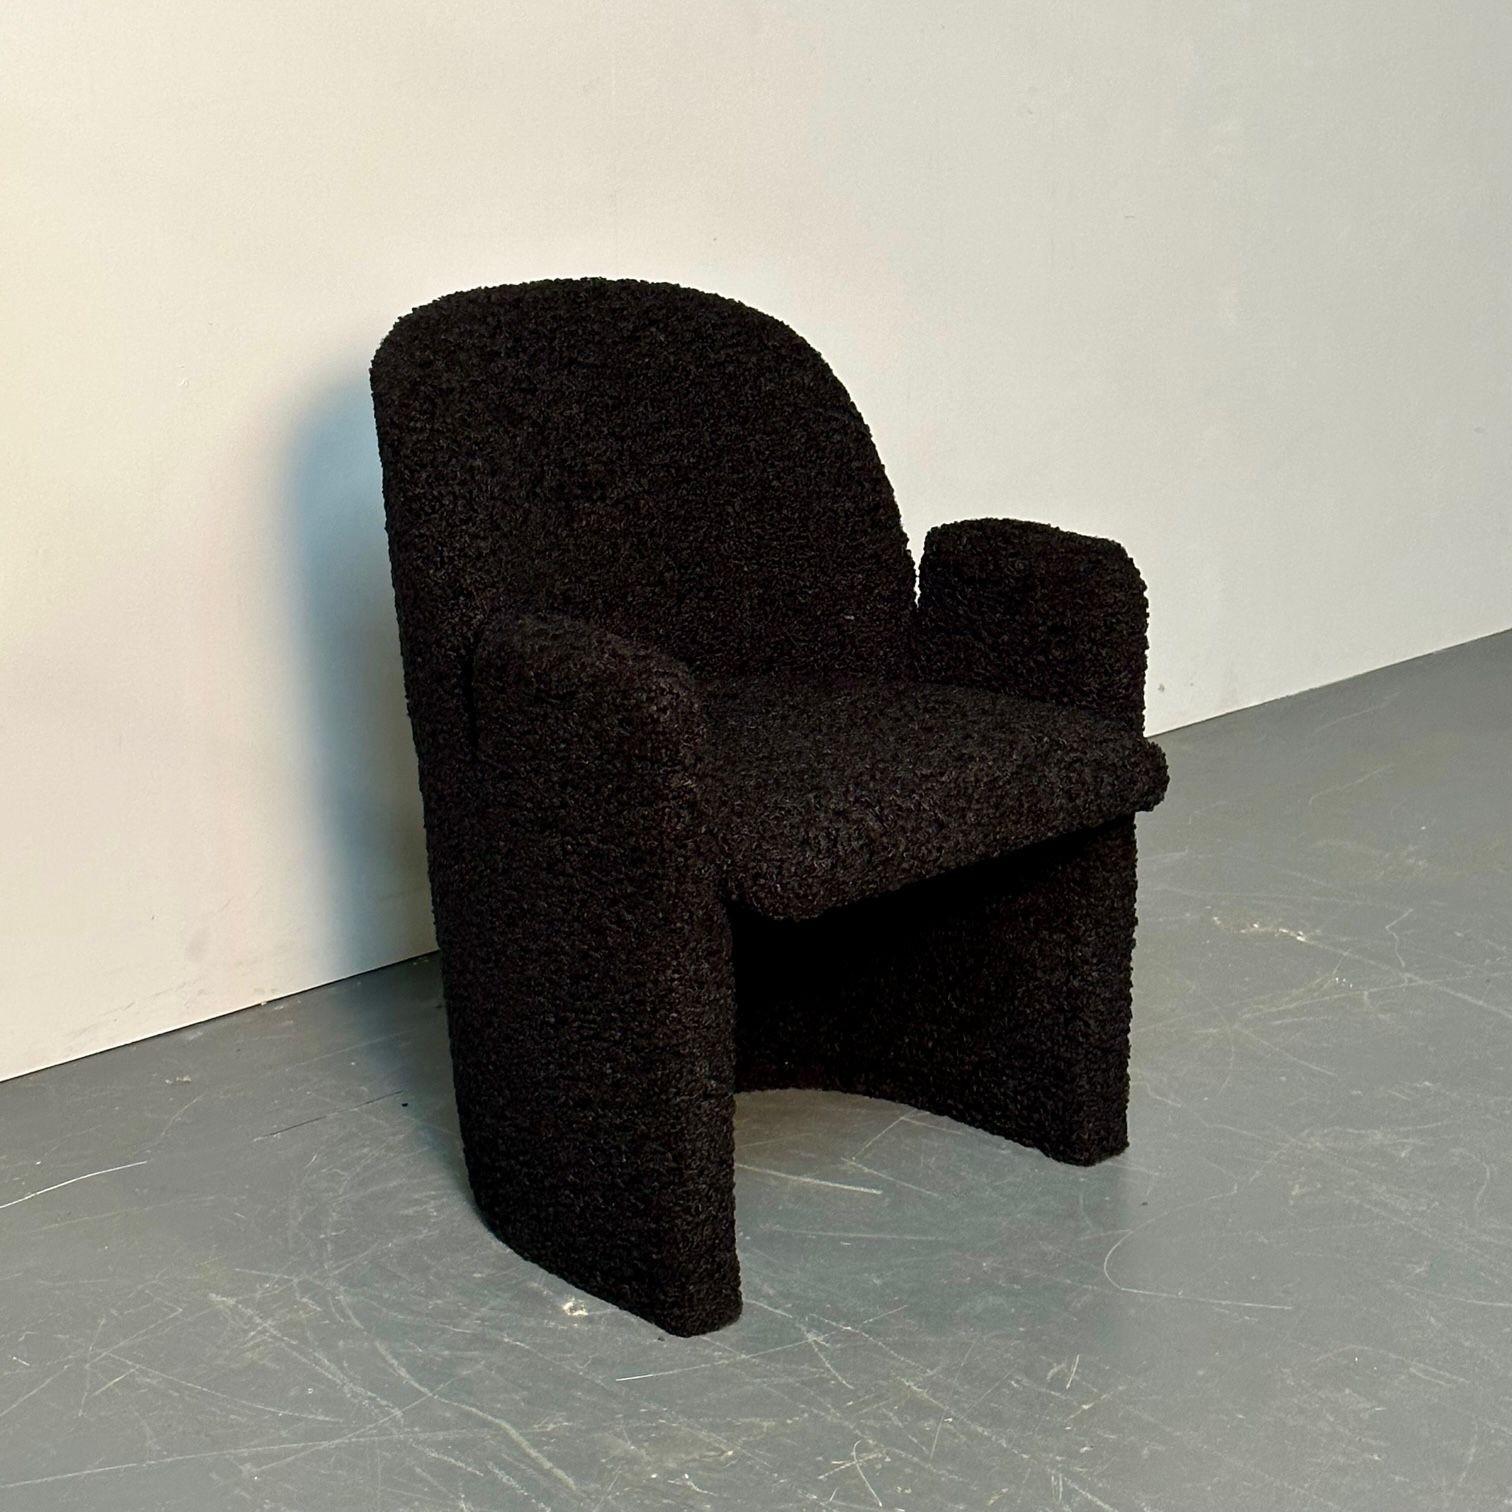 Single Mid-Century Modern style arm / lounge chair, black bouclé, organic form
 
Contemporary arm, accent, or lounge chair newly upholstered in a luxurious black bouclé fabric. The chair has a slightly titled backrest and upholstered arms for